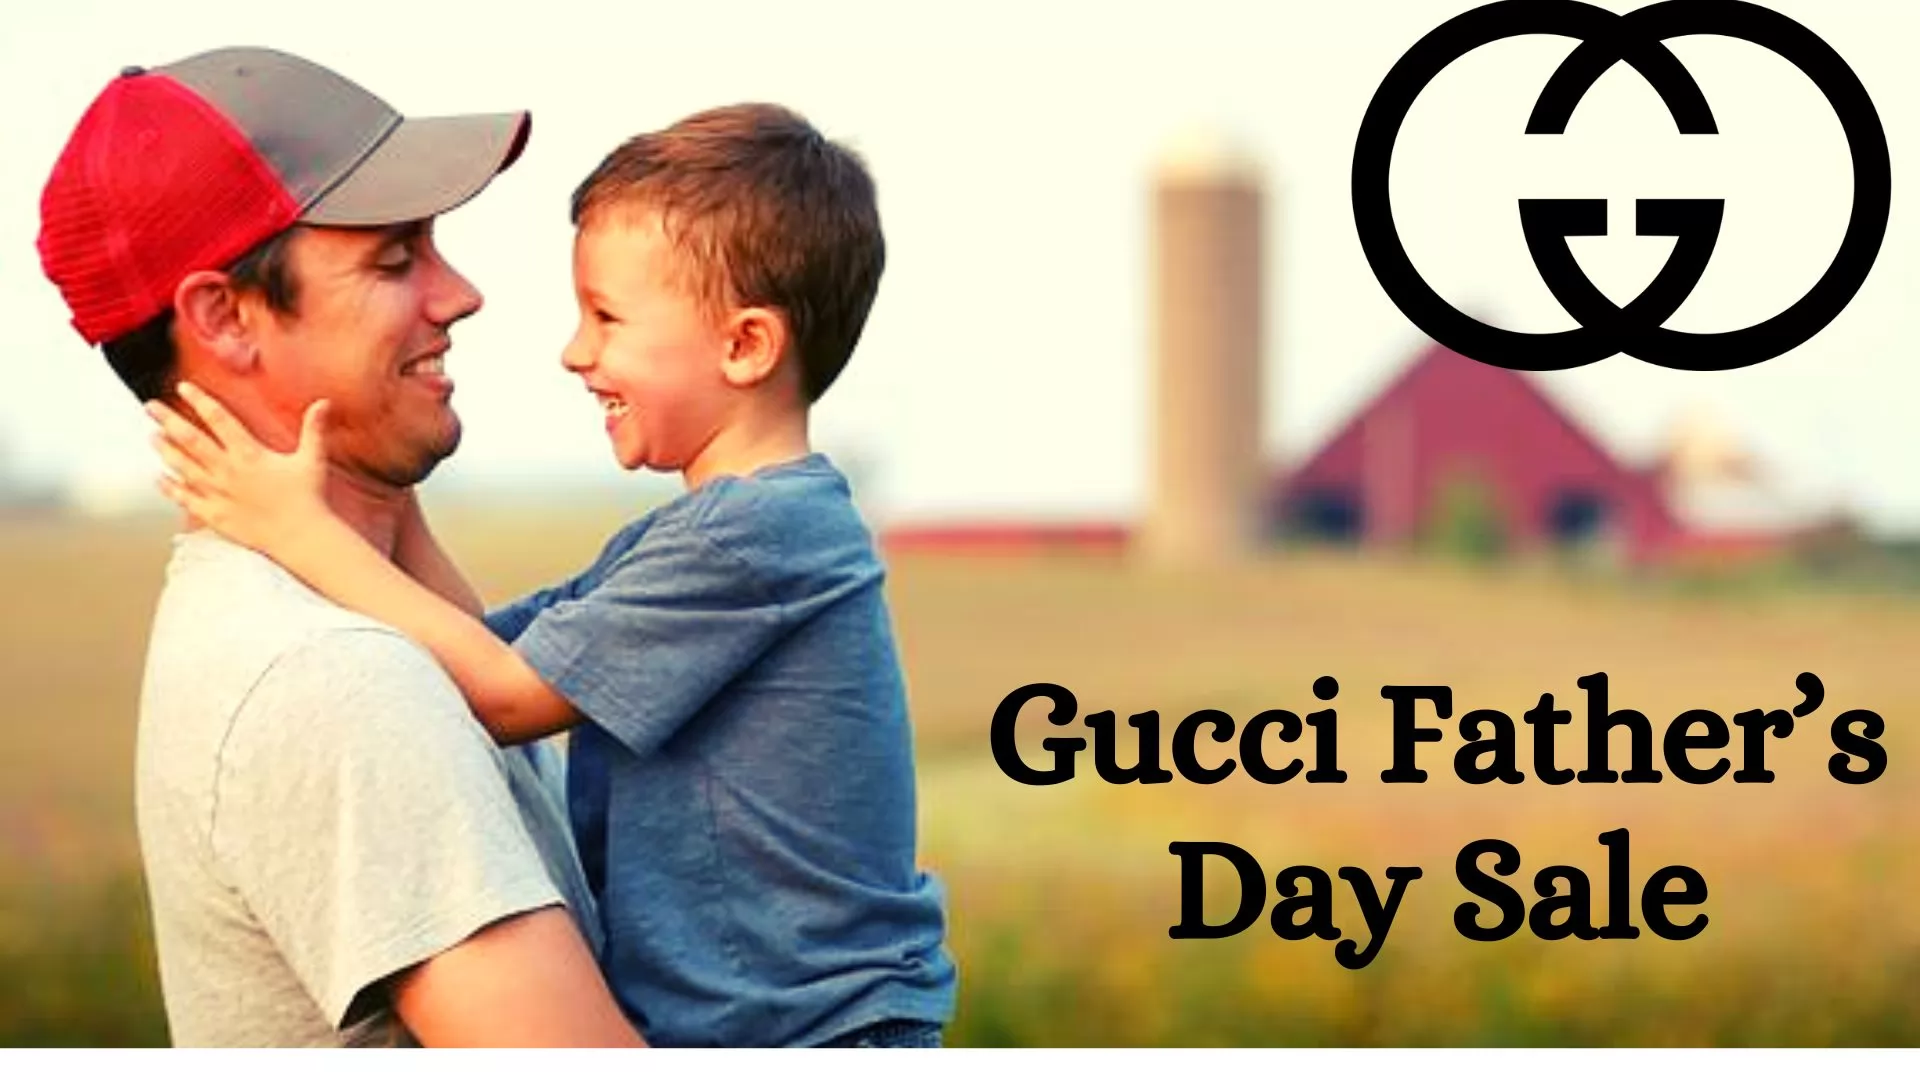 Gucci Father’s Day Sale